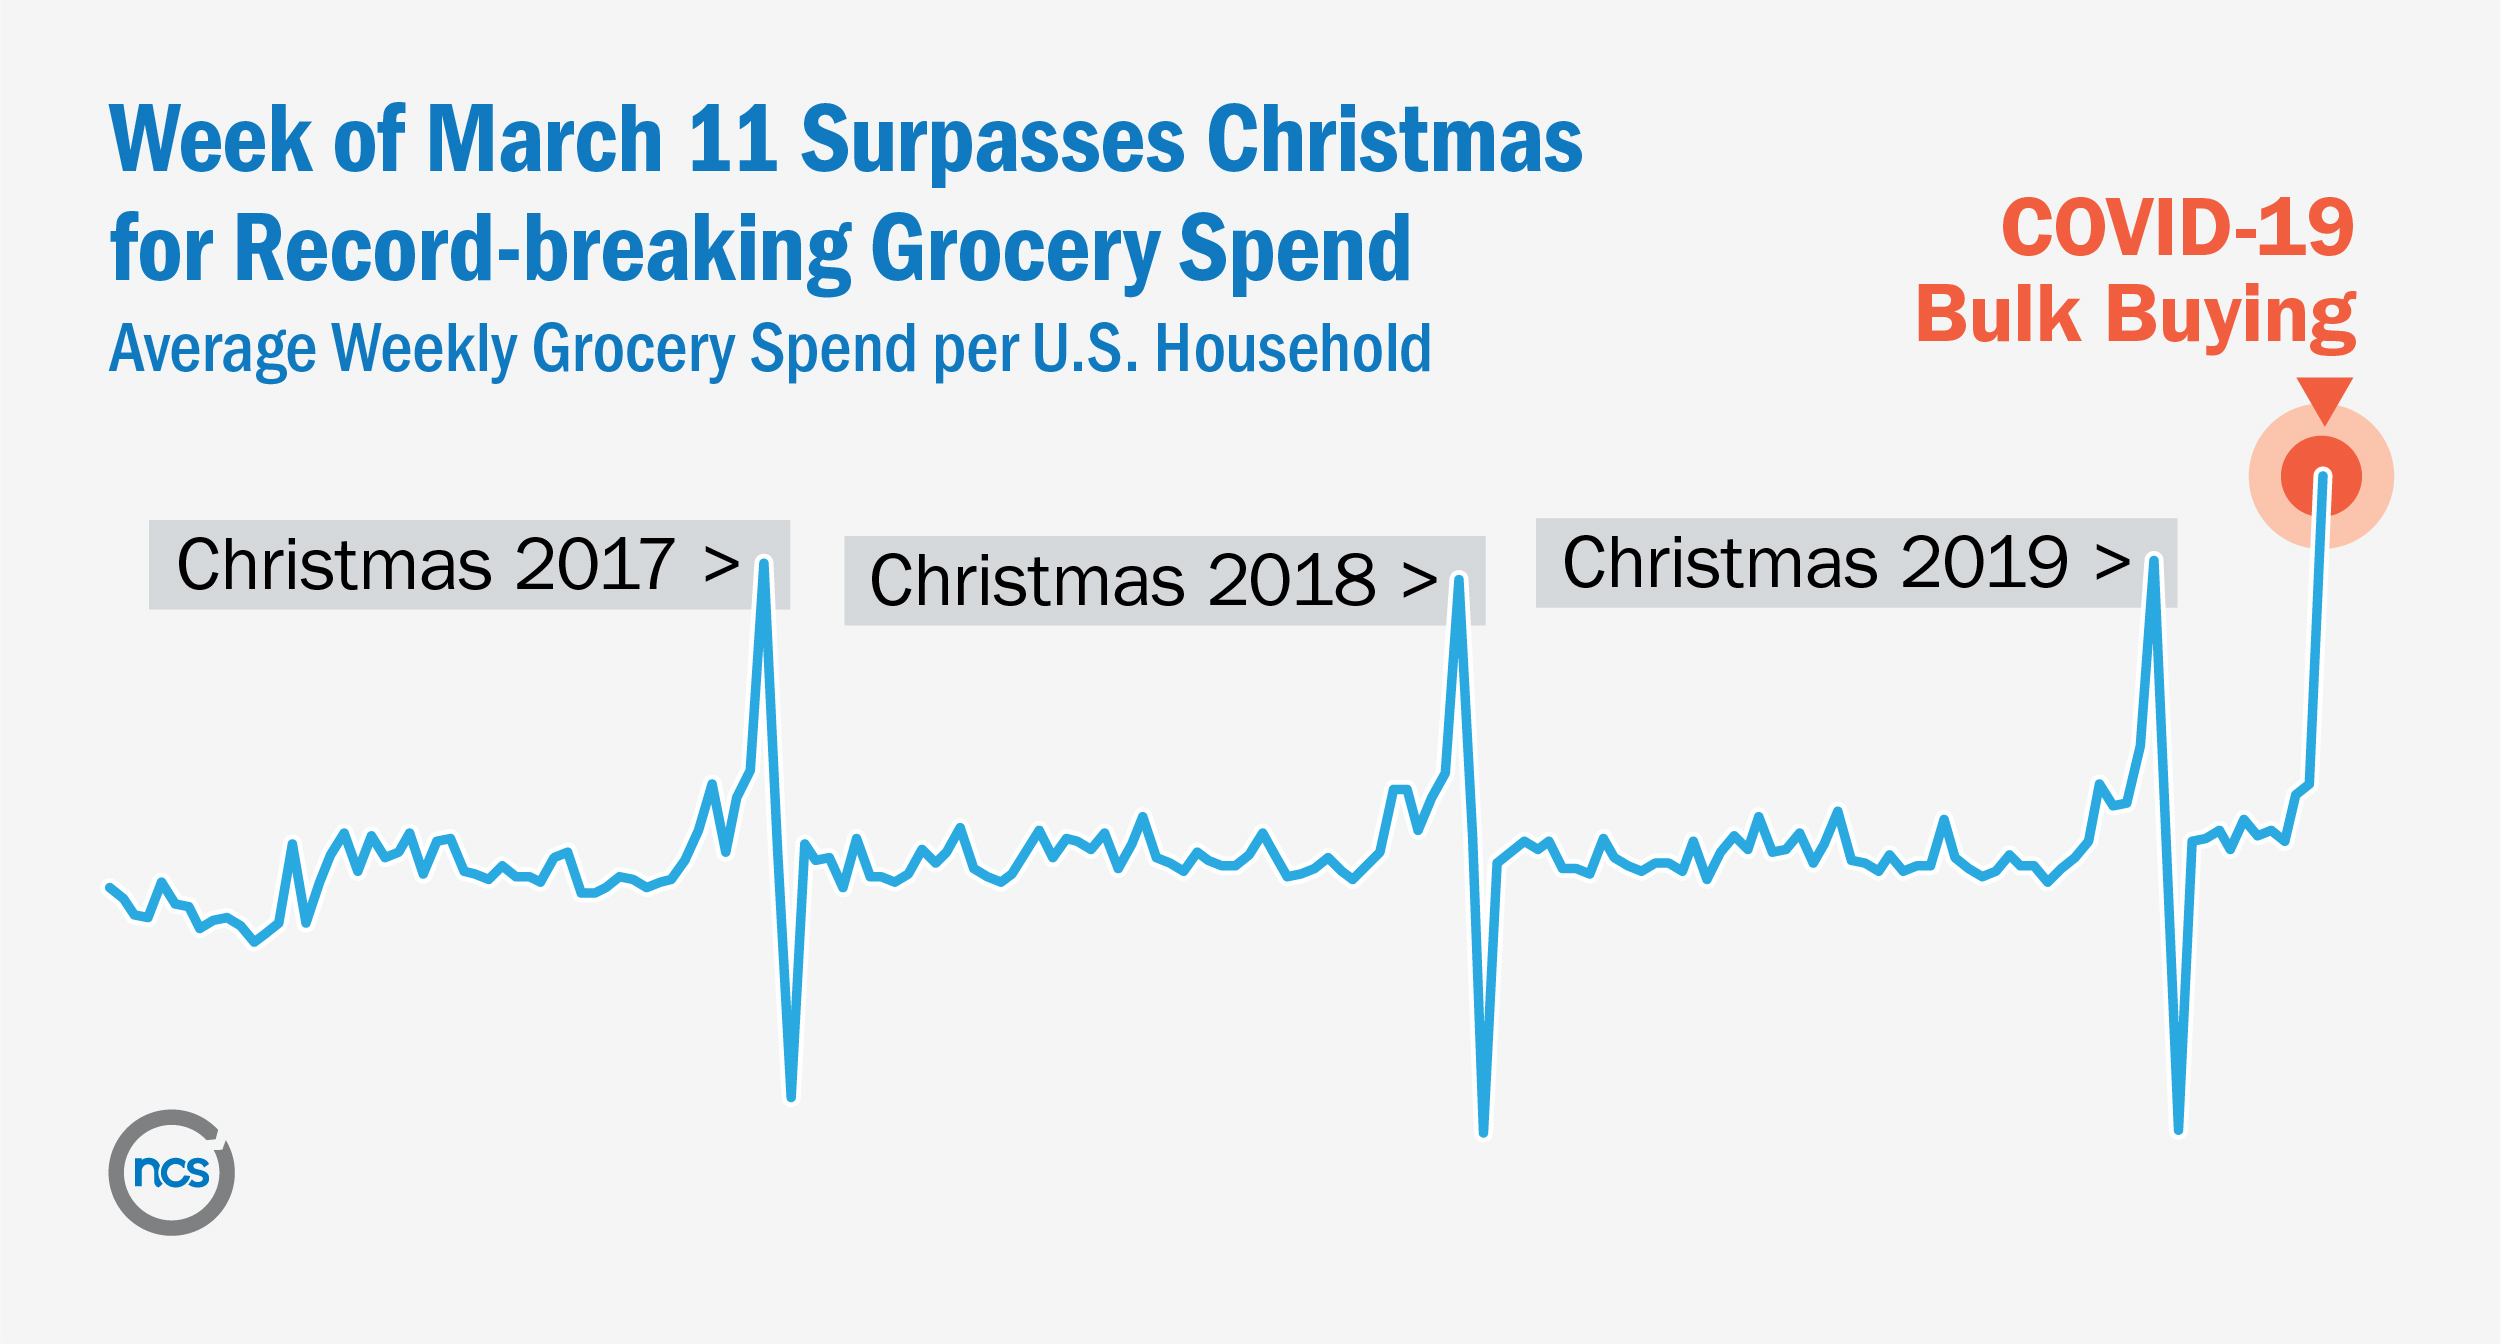 NCS graph shows week of March 11 surpasses Christmas for record-breaking grocery spend